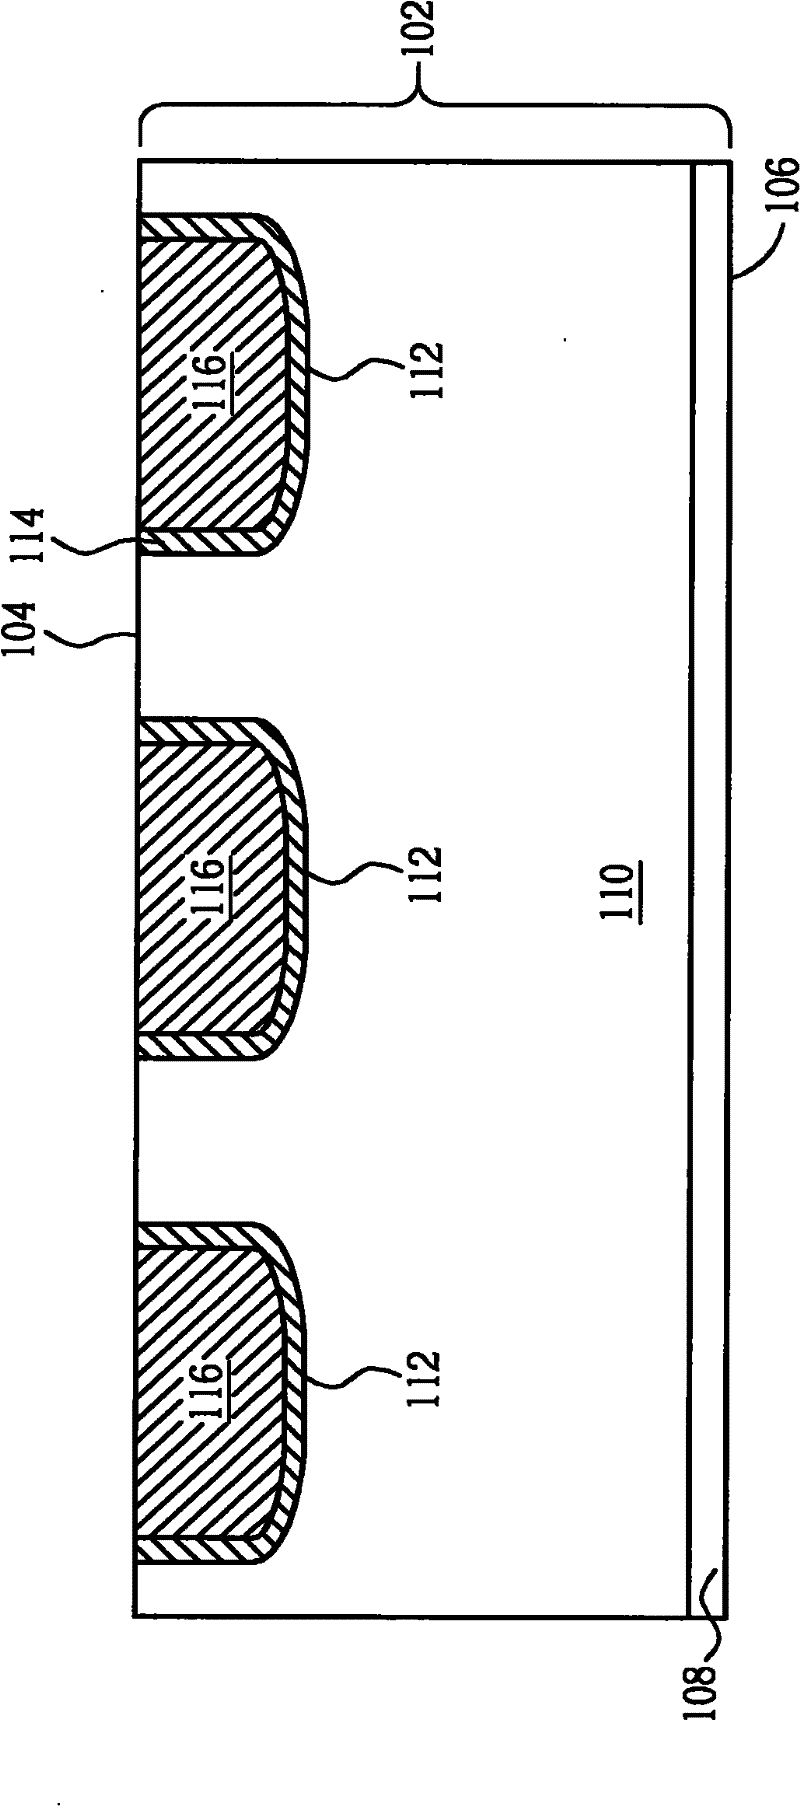 Overlapped trench gate semiconductor component and manufacturing method thereof